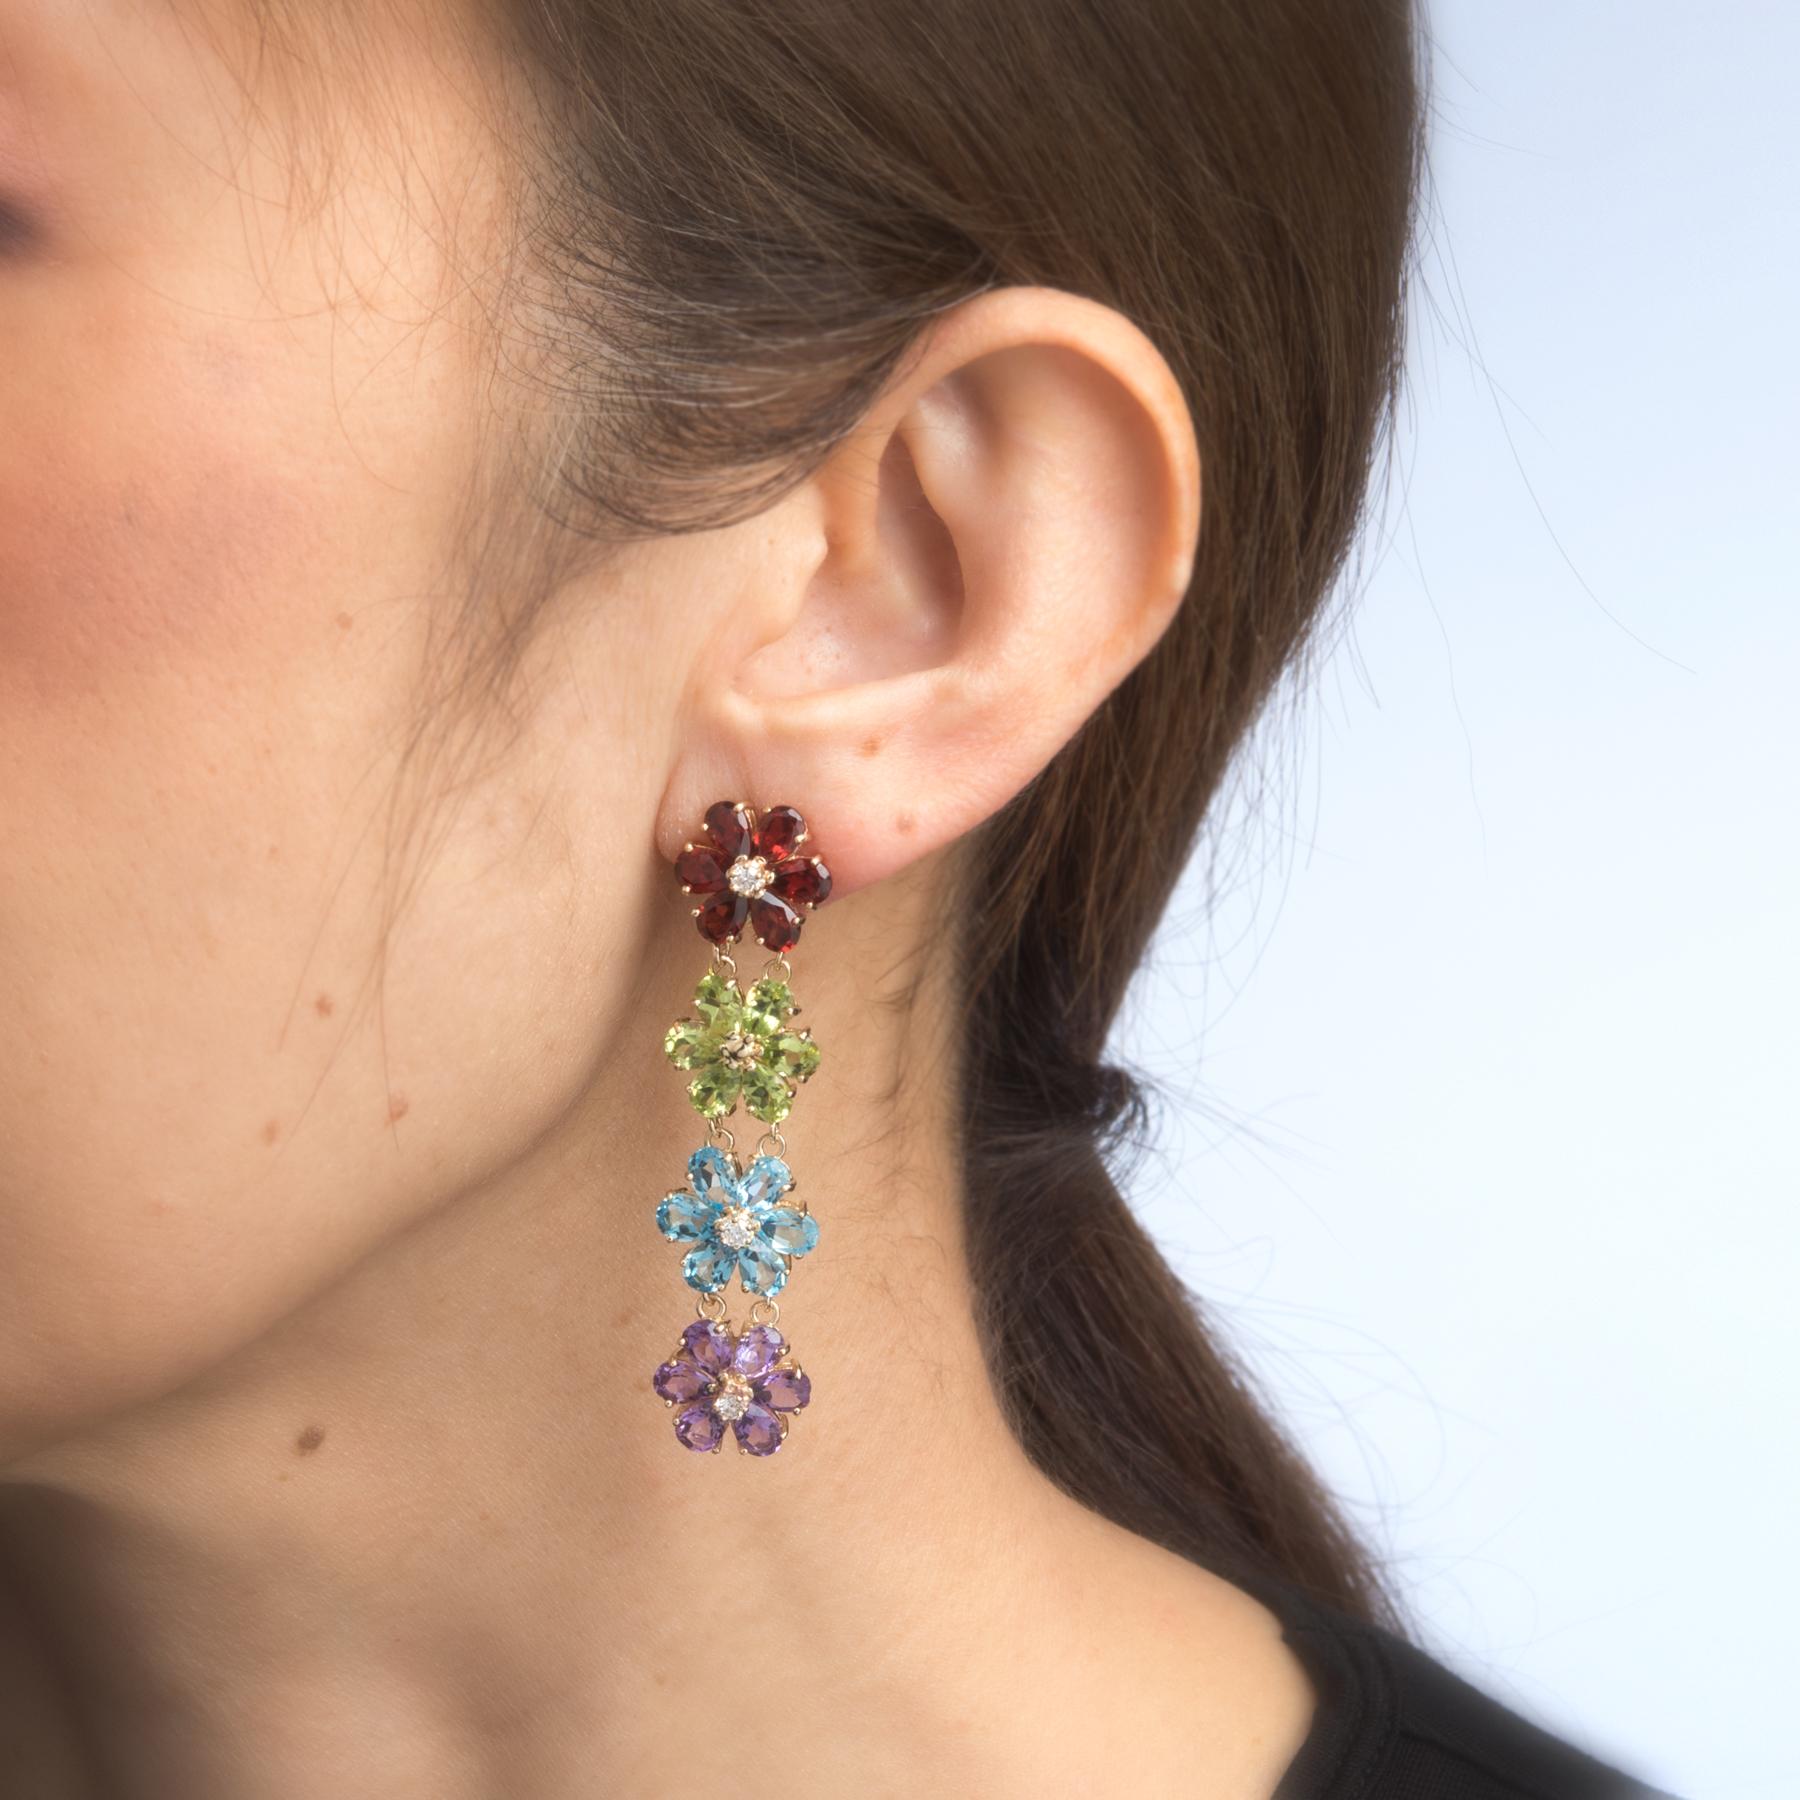 Stylish pair of estate semi precious gemstone & diamond drop earrings, crafted in 14k yellow gold. 

Faceted pear cut garnet, peridot, blue topaz and amethyst each measures 5mm x 4mm (estimated at 0.25 carats each). The total weight is estimated at